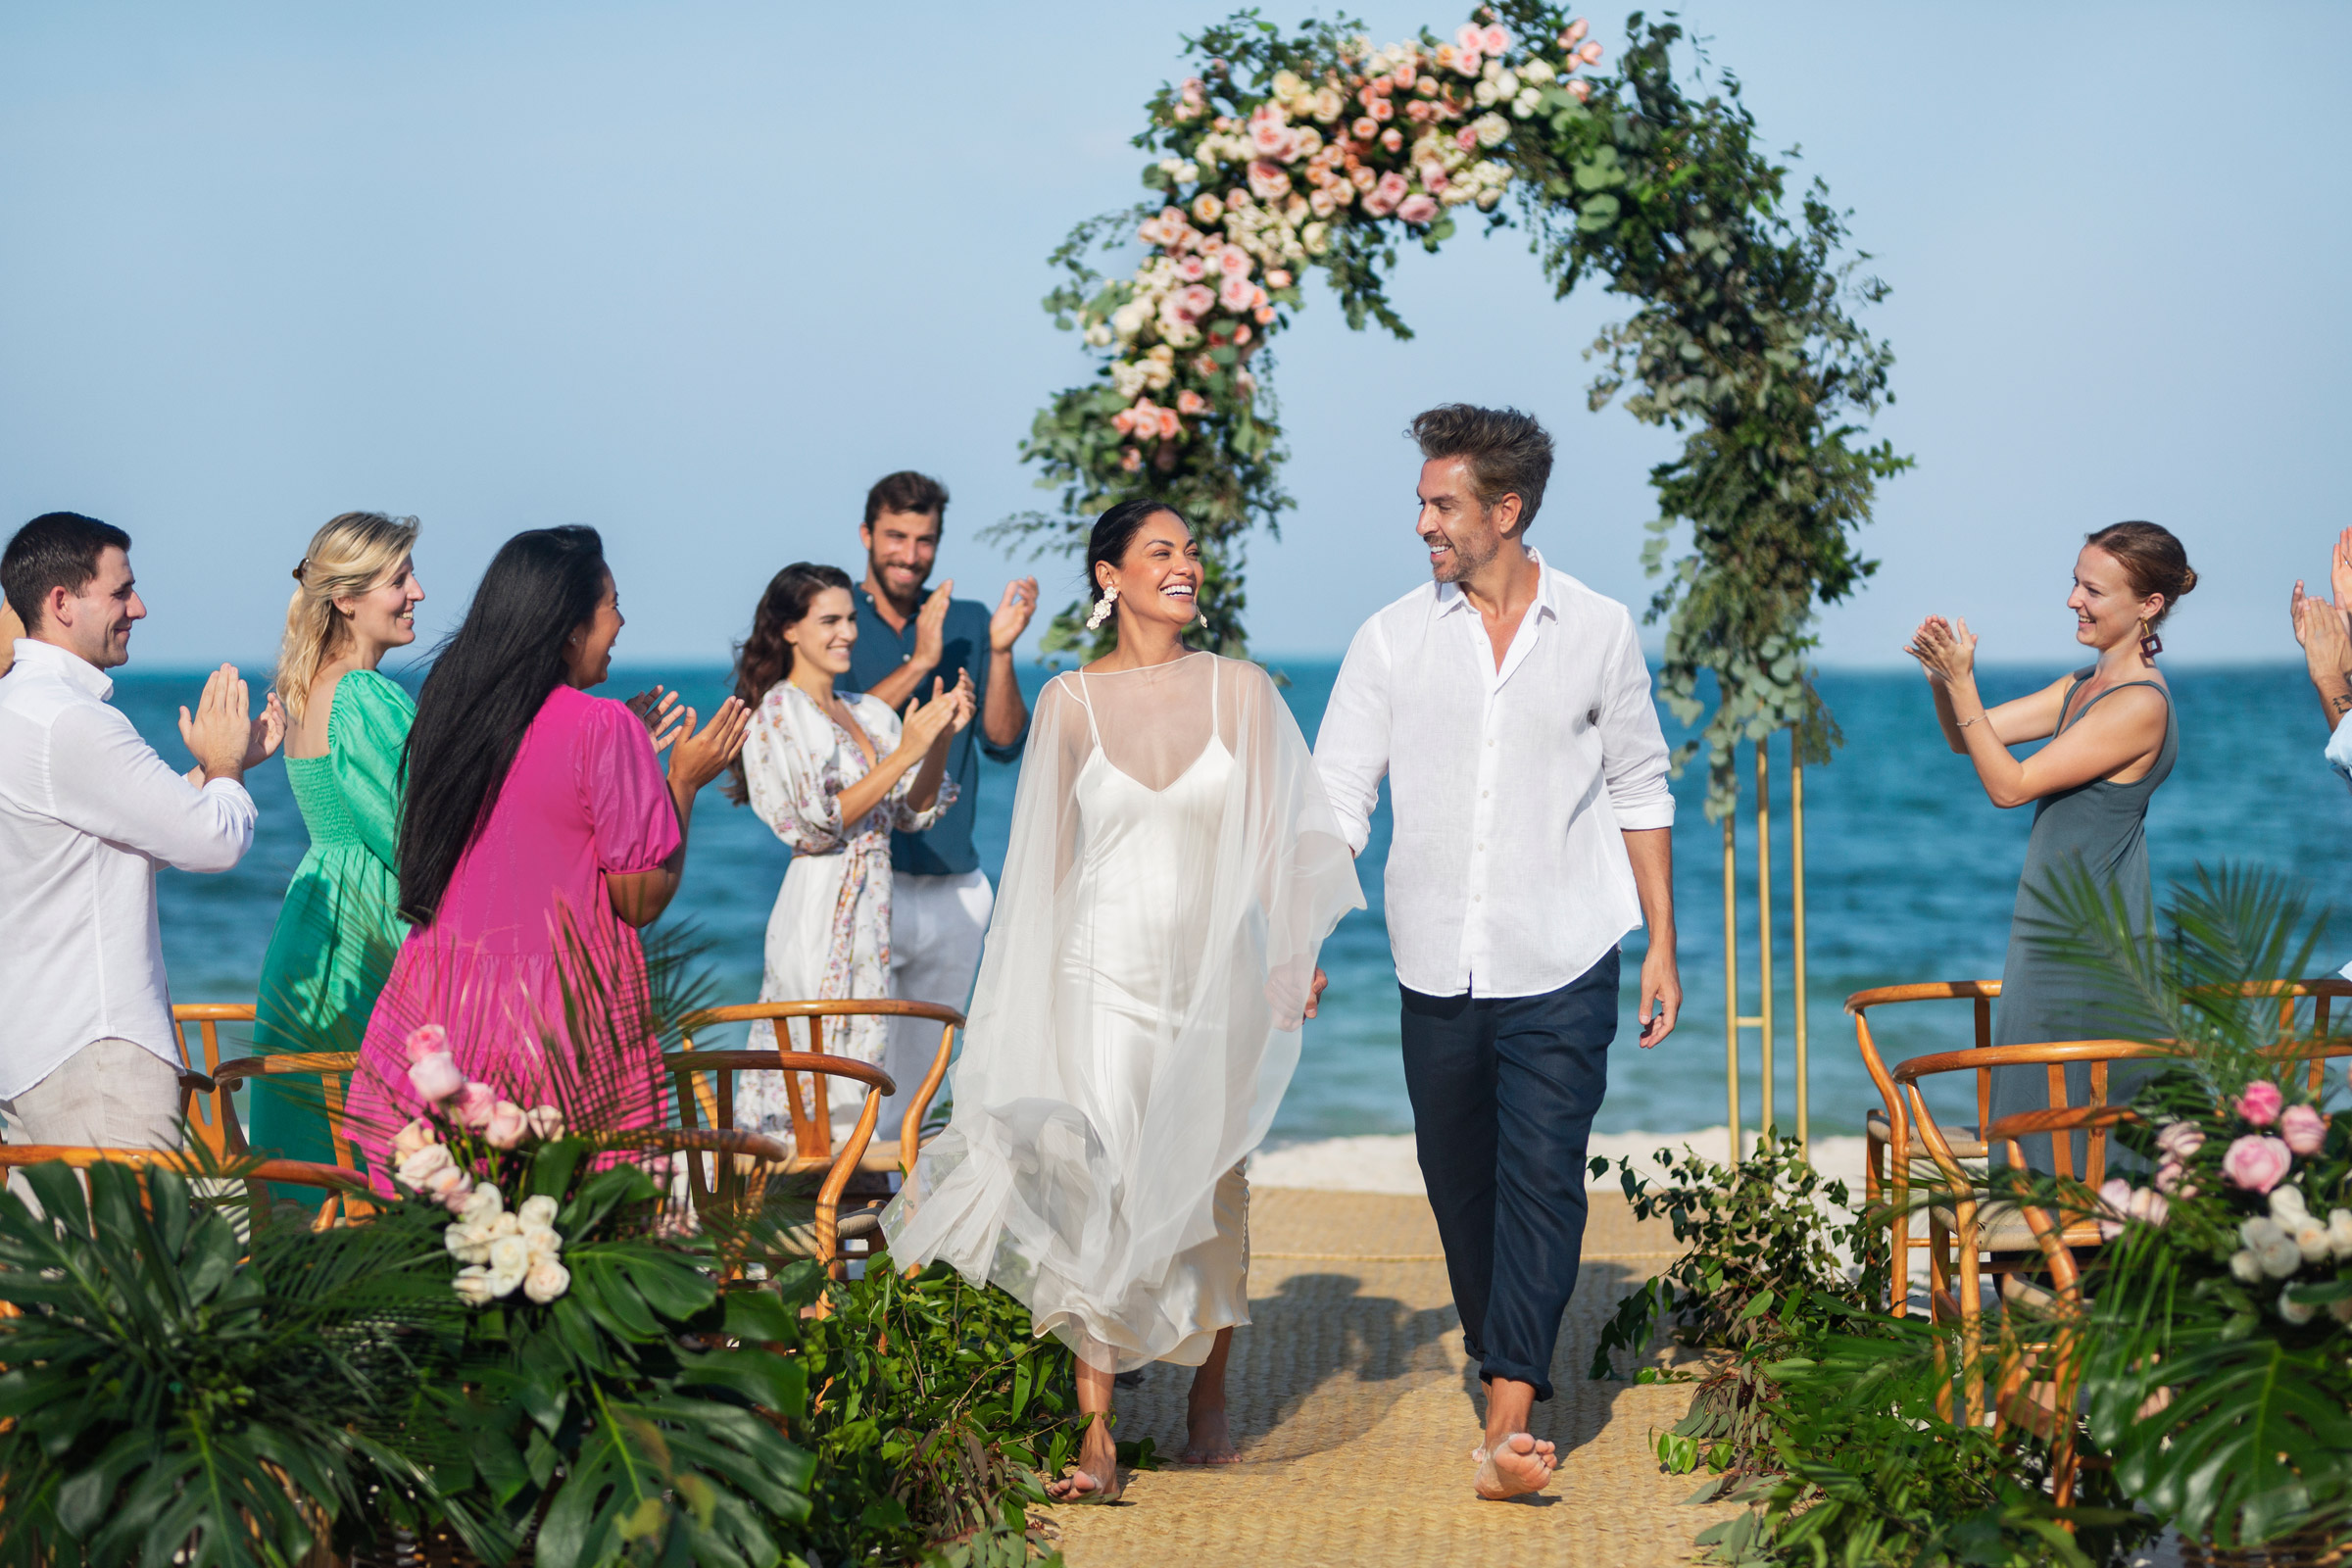 Festive wedding celebration in Excellence Playa Mujeres